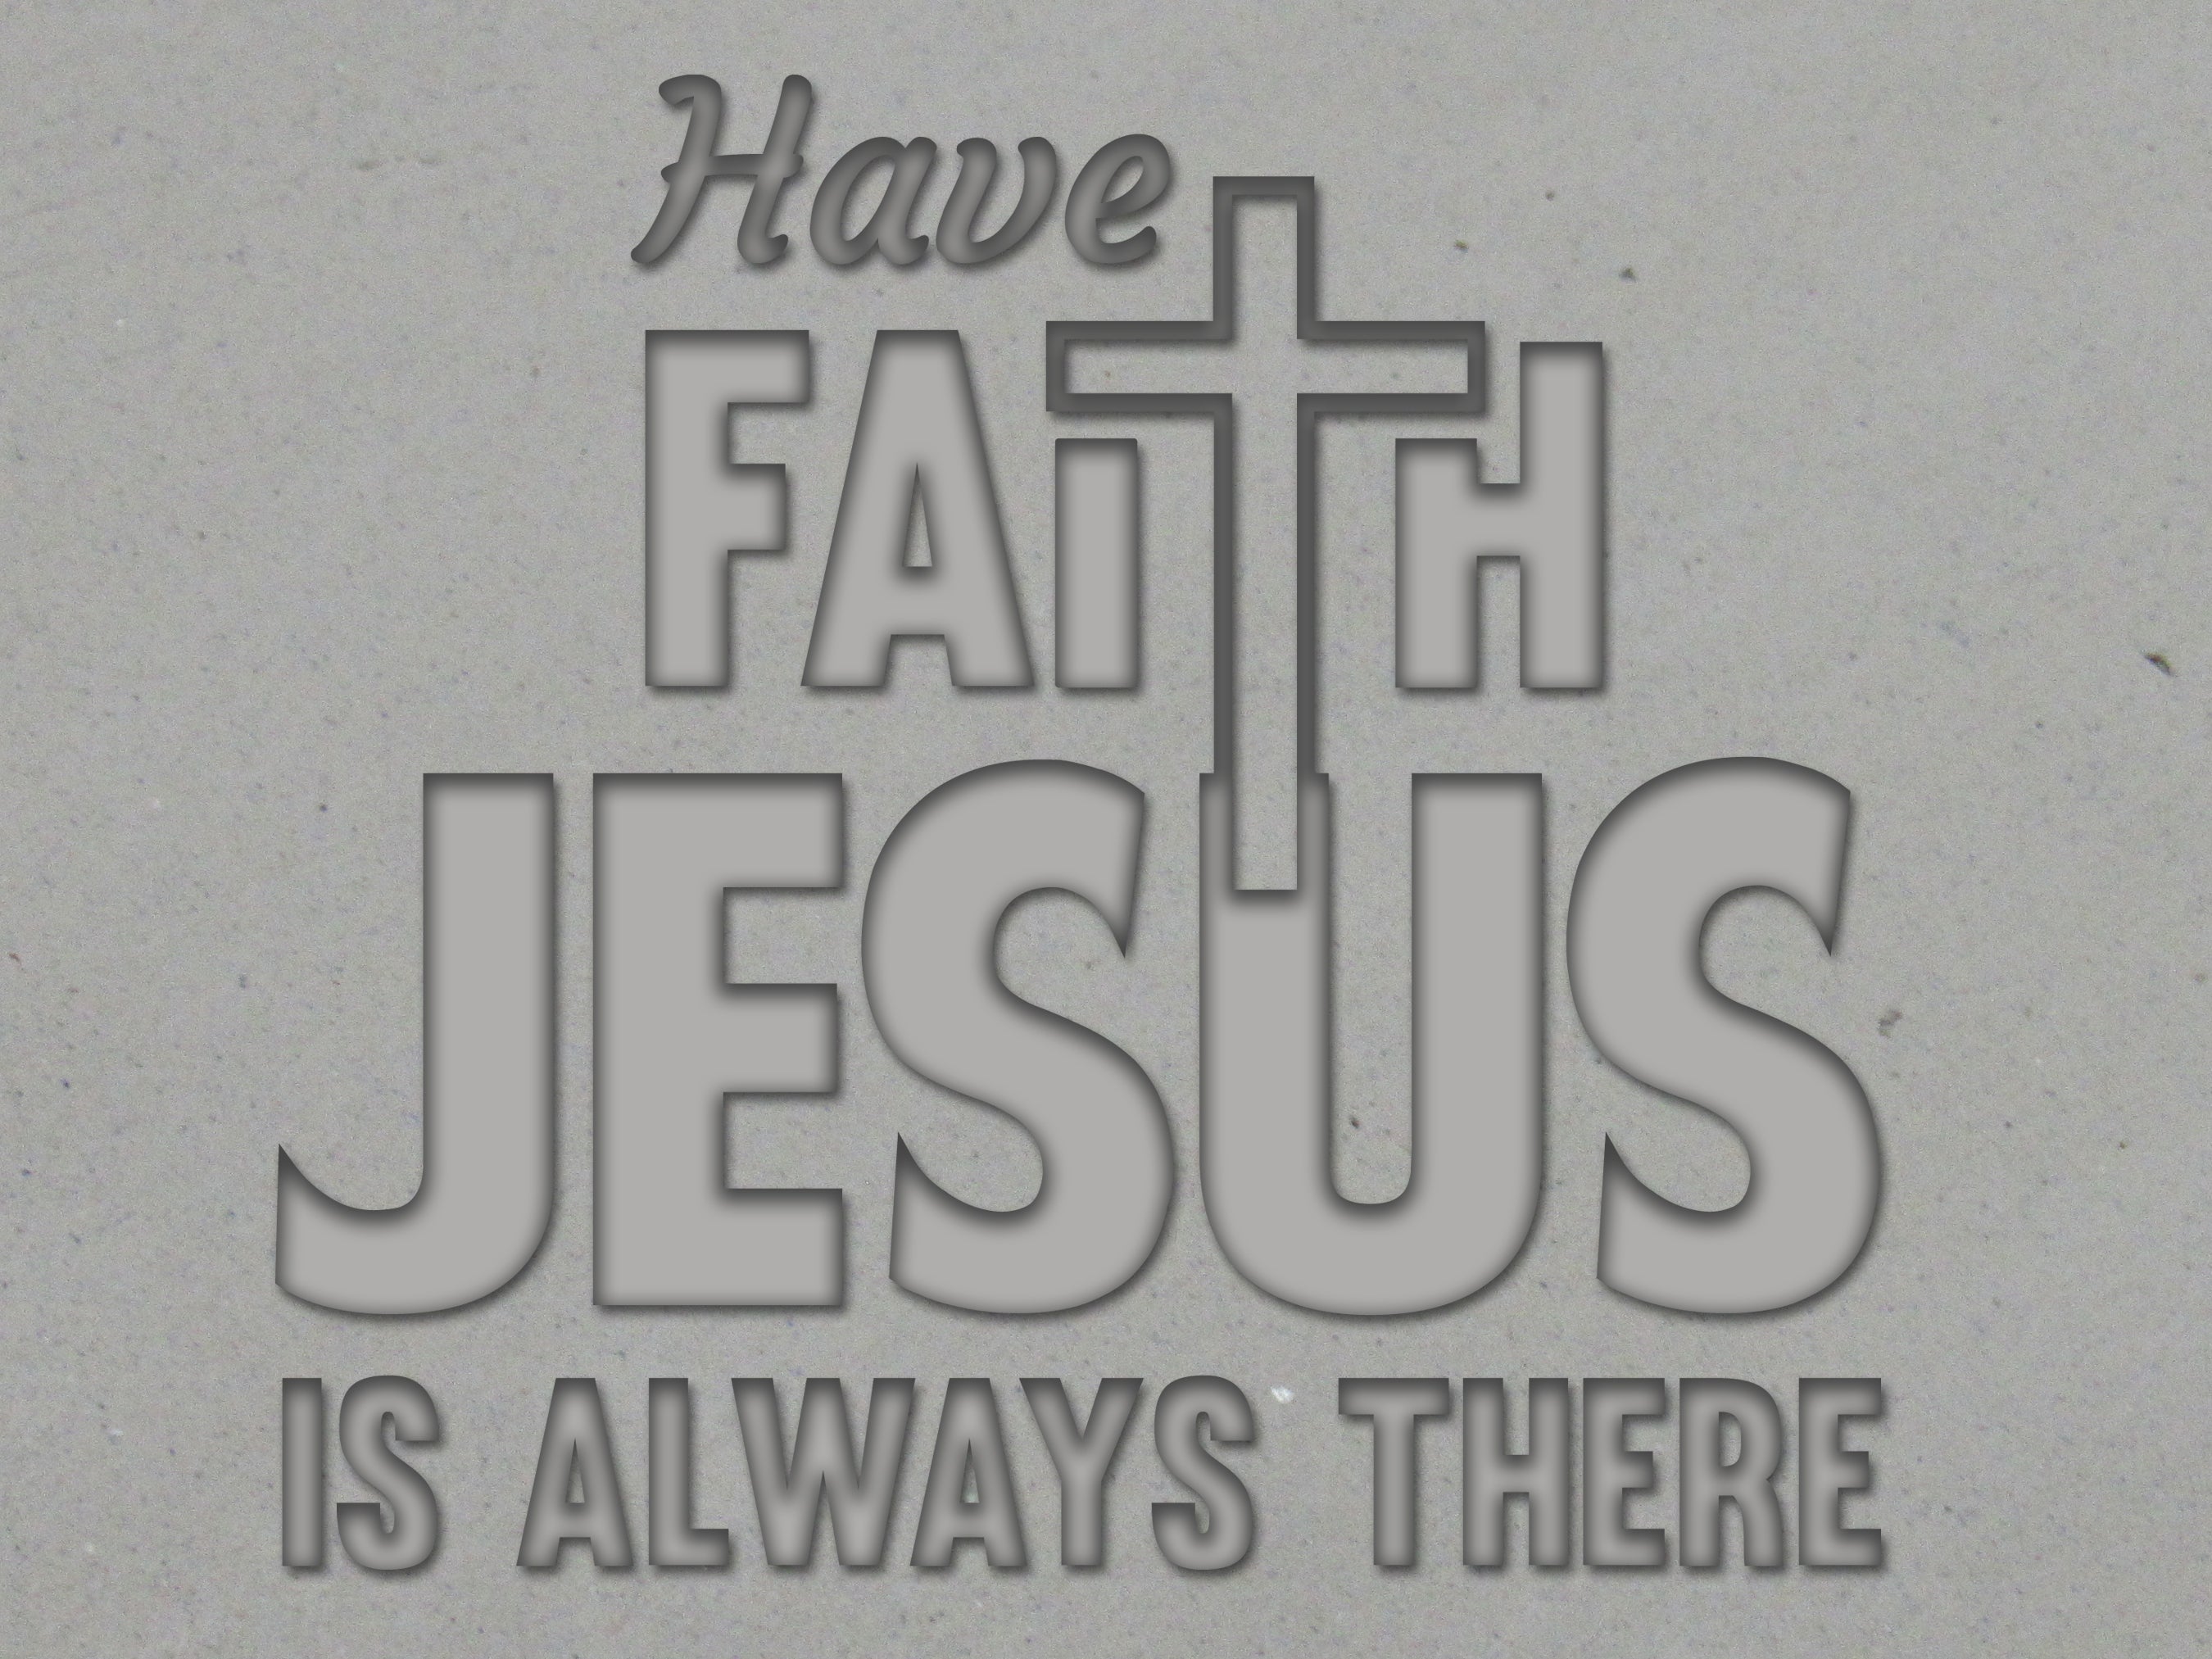 Have Faith Jesus is Always There mug clay stamp - Handbuild Clay Stamp - perfect size for mugs